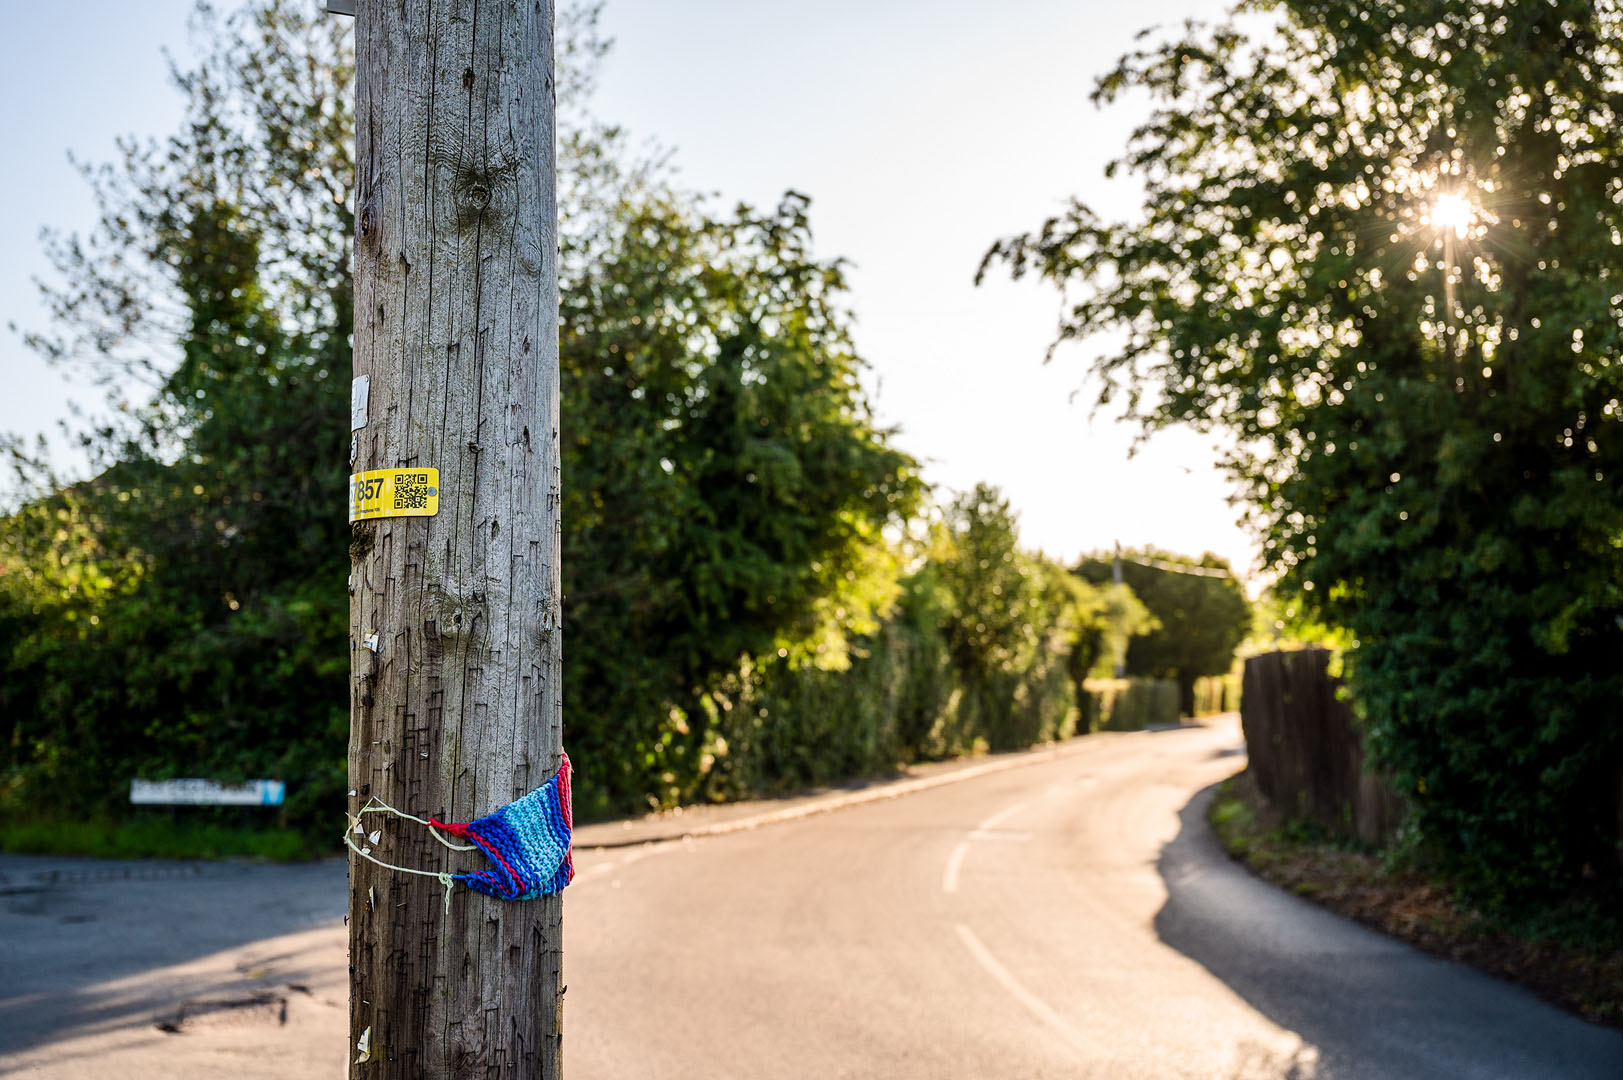 Knitted rainbow scarf attached to telegraph pole in deserted Rural road scene